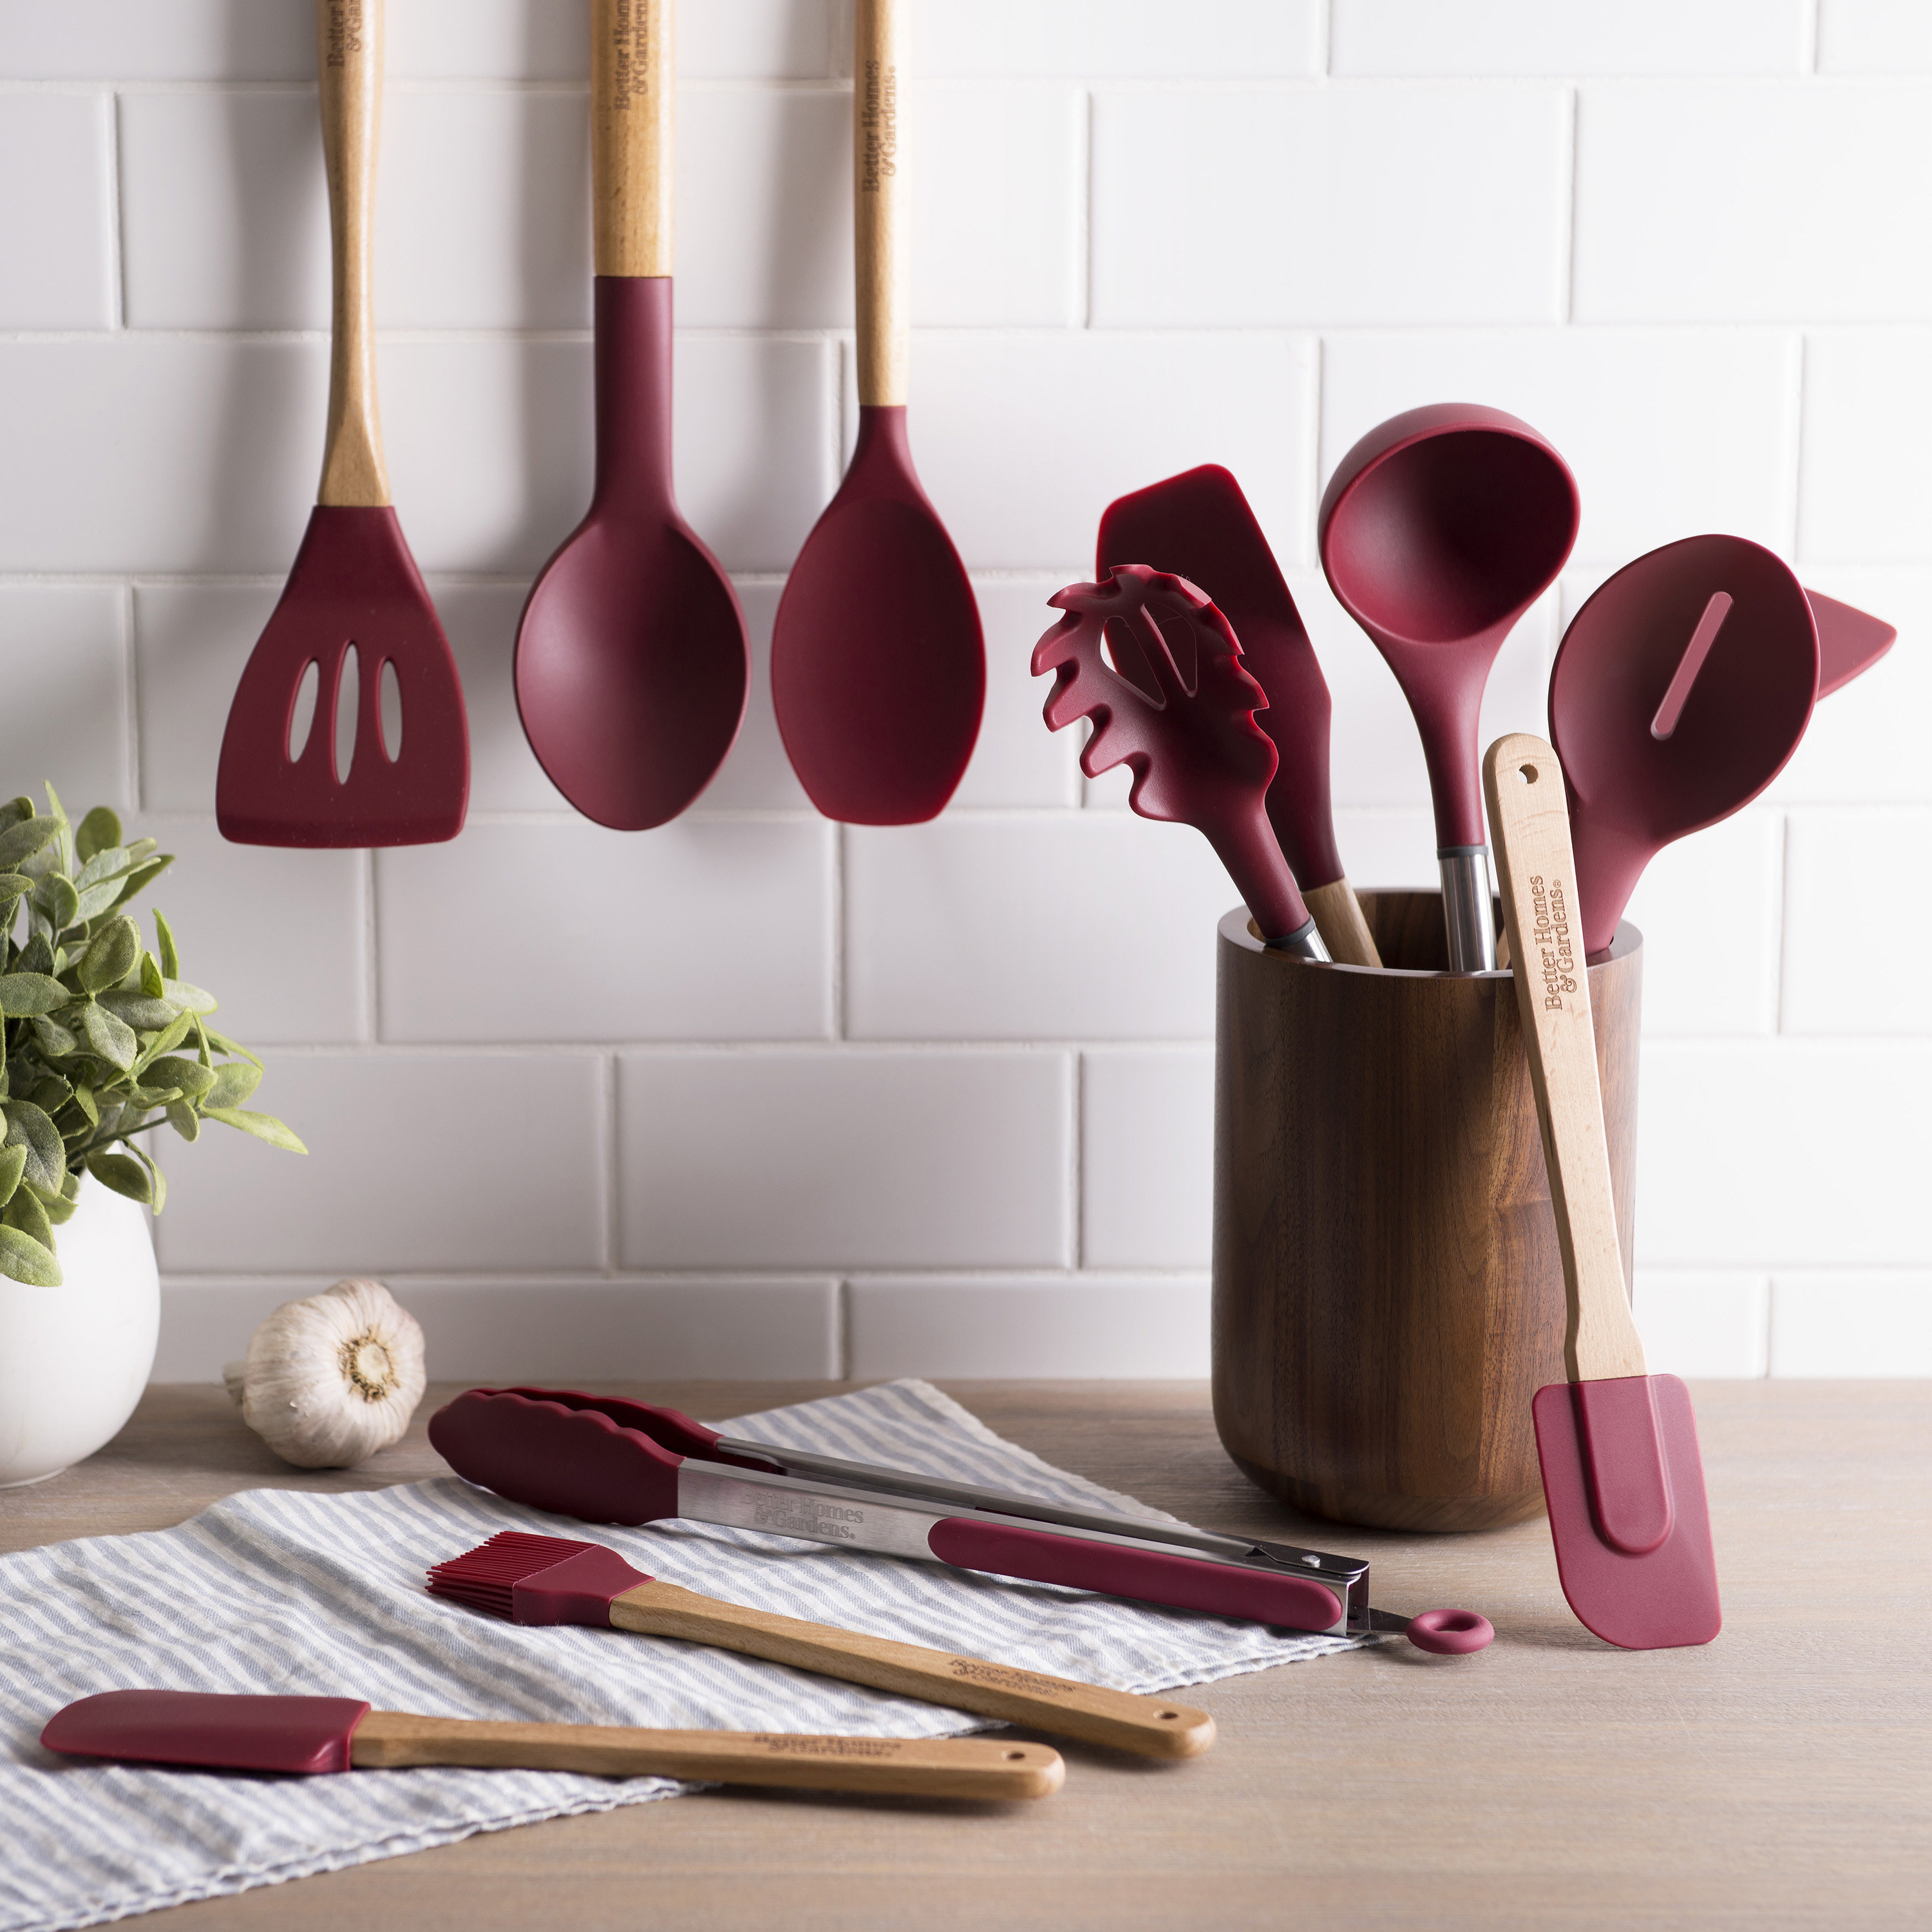 merlot colored silicon kitchen utensils laying on a table, in a canister, and hanging on a wall